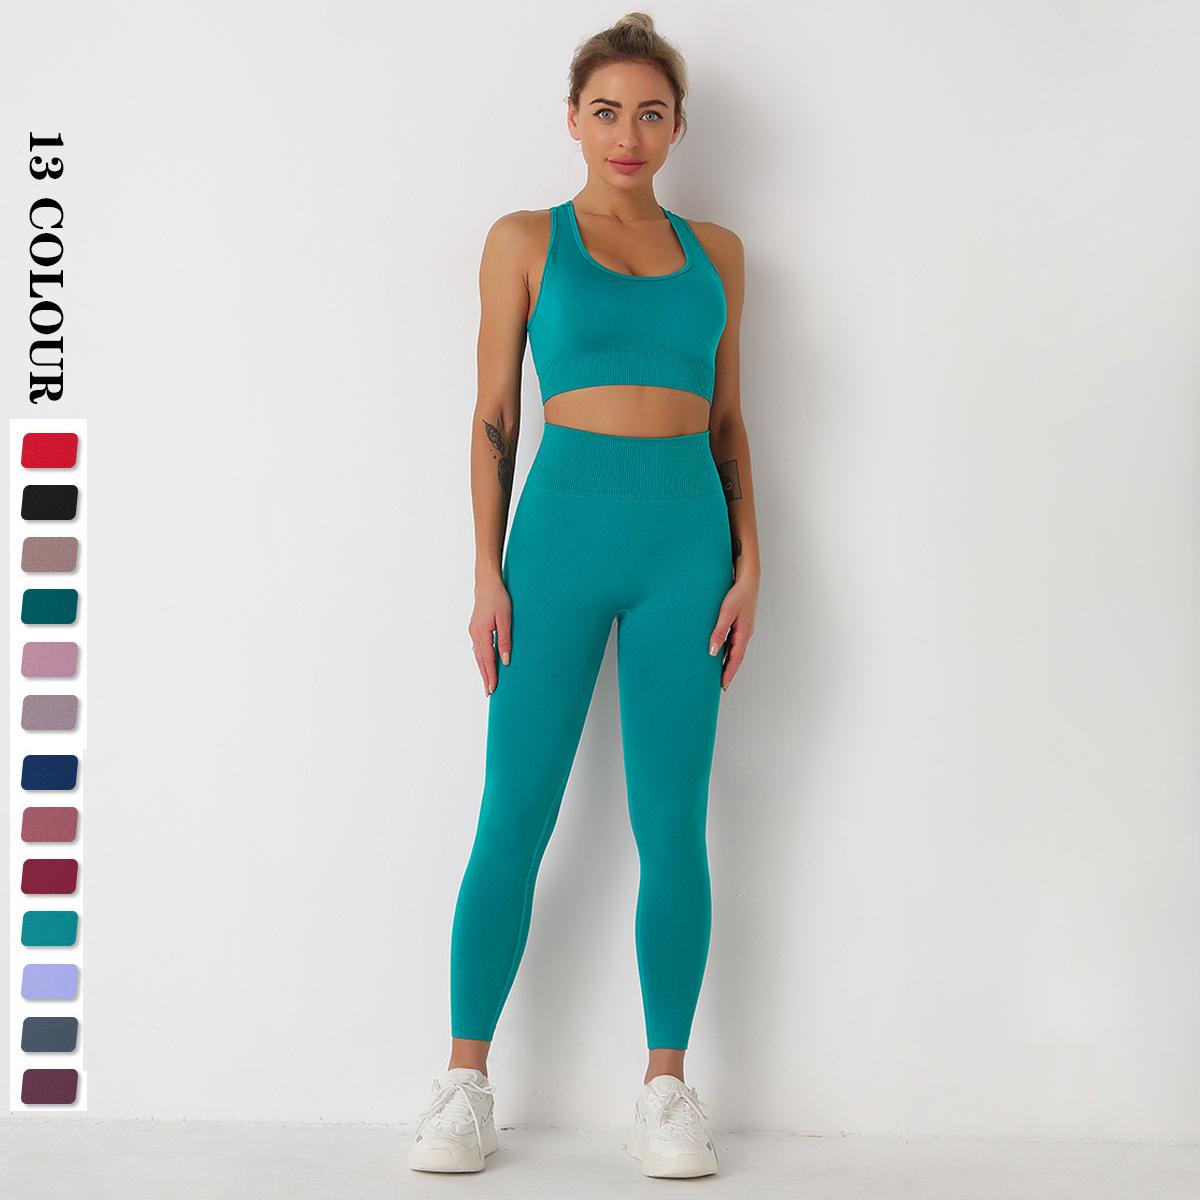 Nessaj Women Yoga Sets Breathable Solid Vest+Leggings Pants Fitness Running Clothes Sexy Gym Top Sportswear